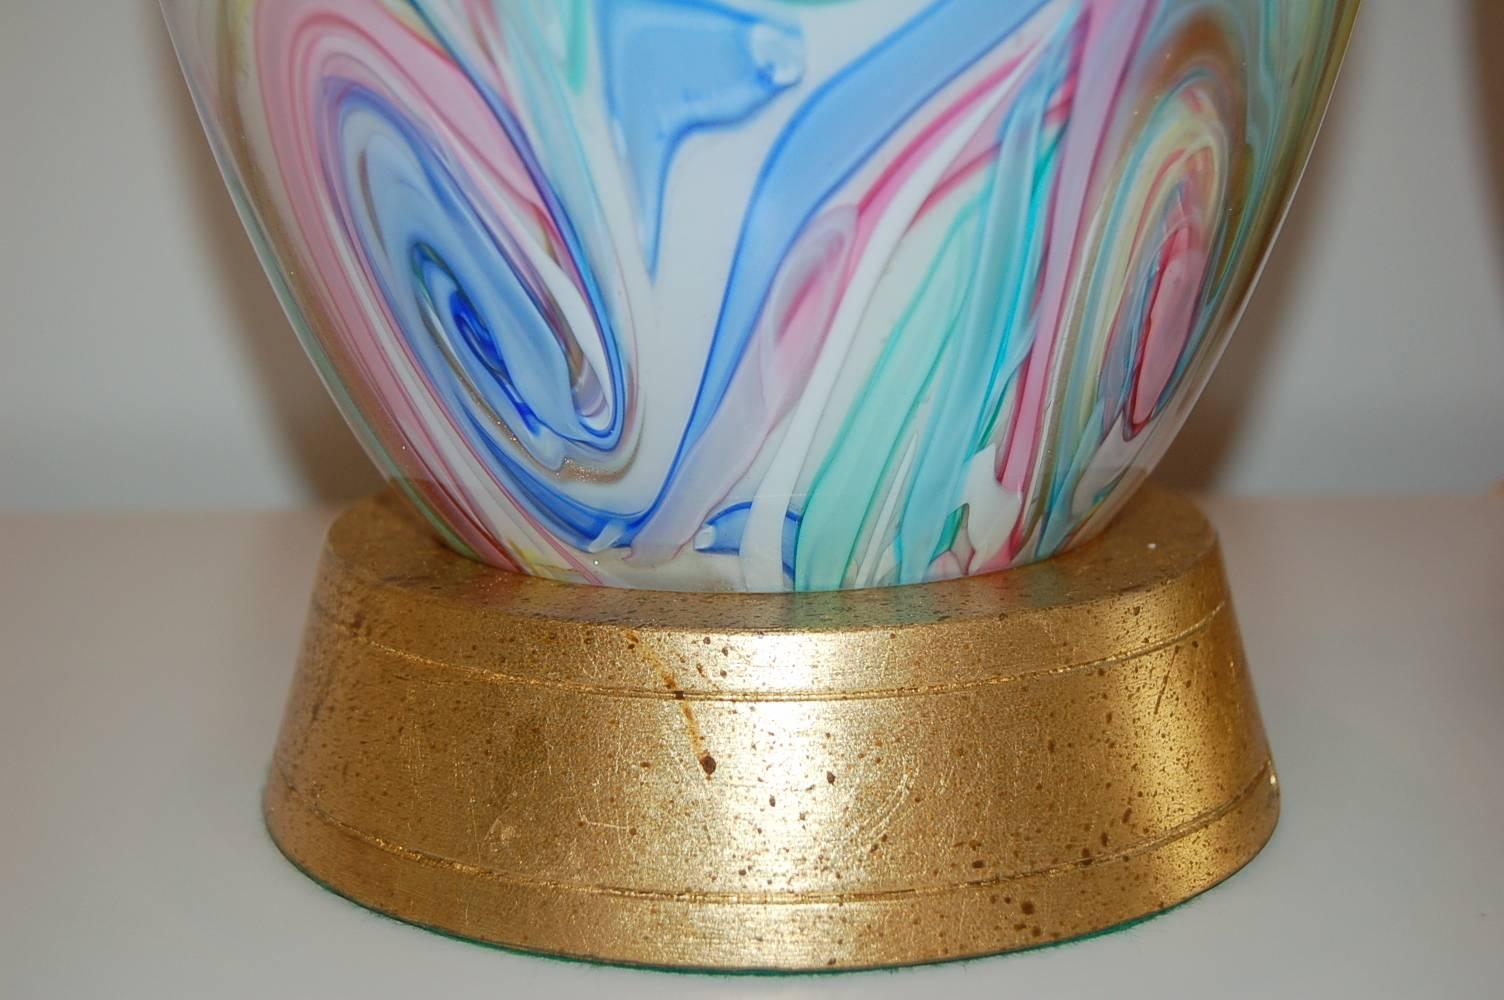 Mid-20th Century Fratelli Toso Murano Lamps of Multicolored Swirls For Sale